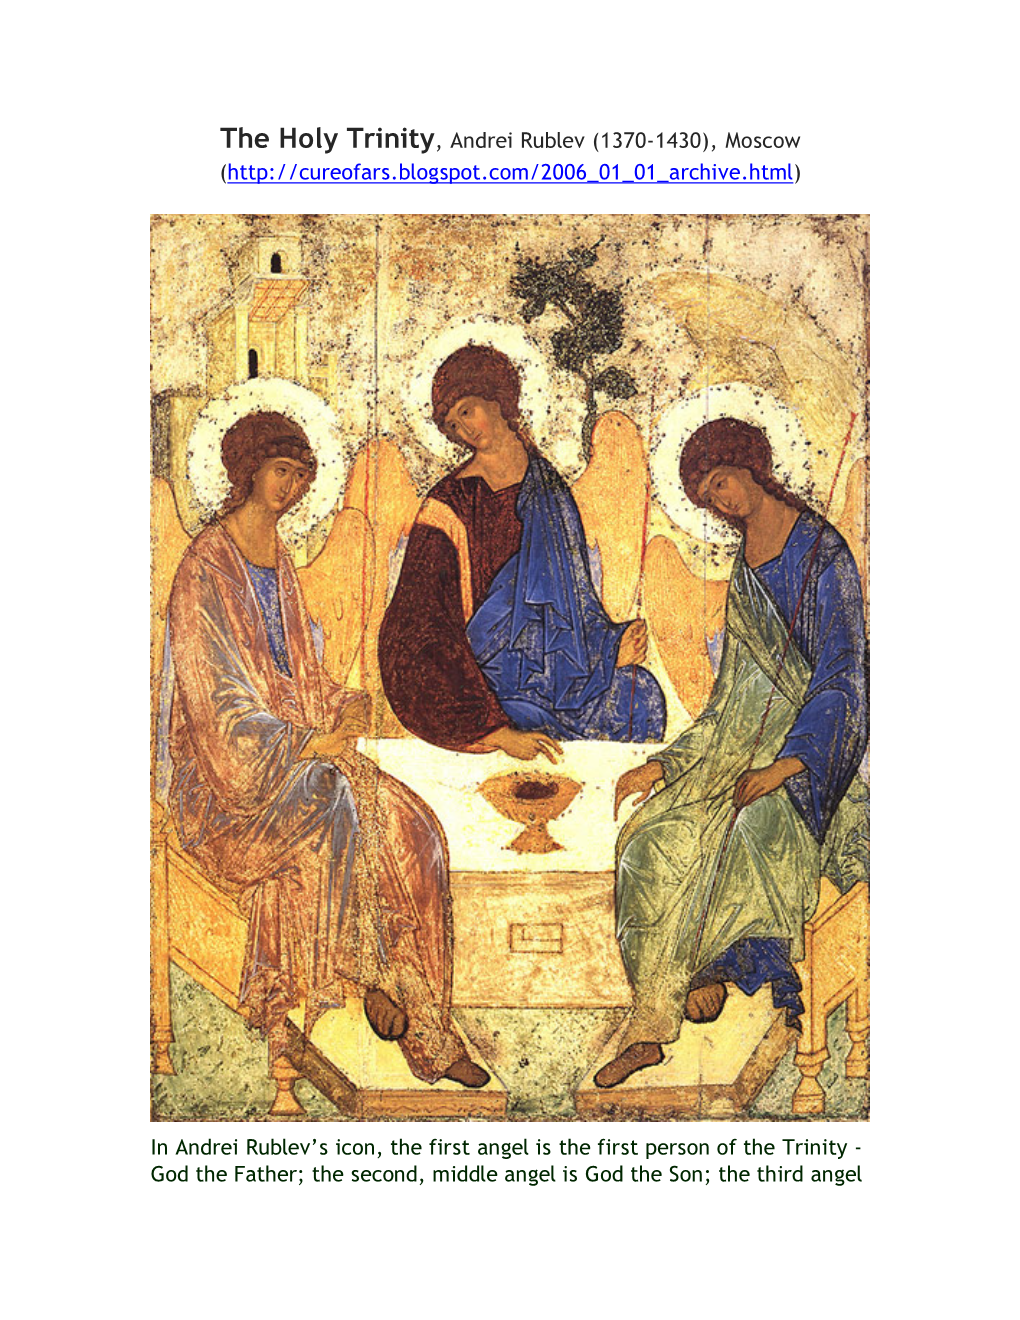 The Holy Trinity, Andrei Rublev (1370-1430), Moscow (